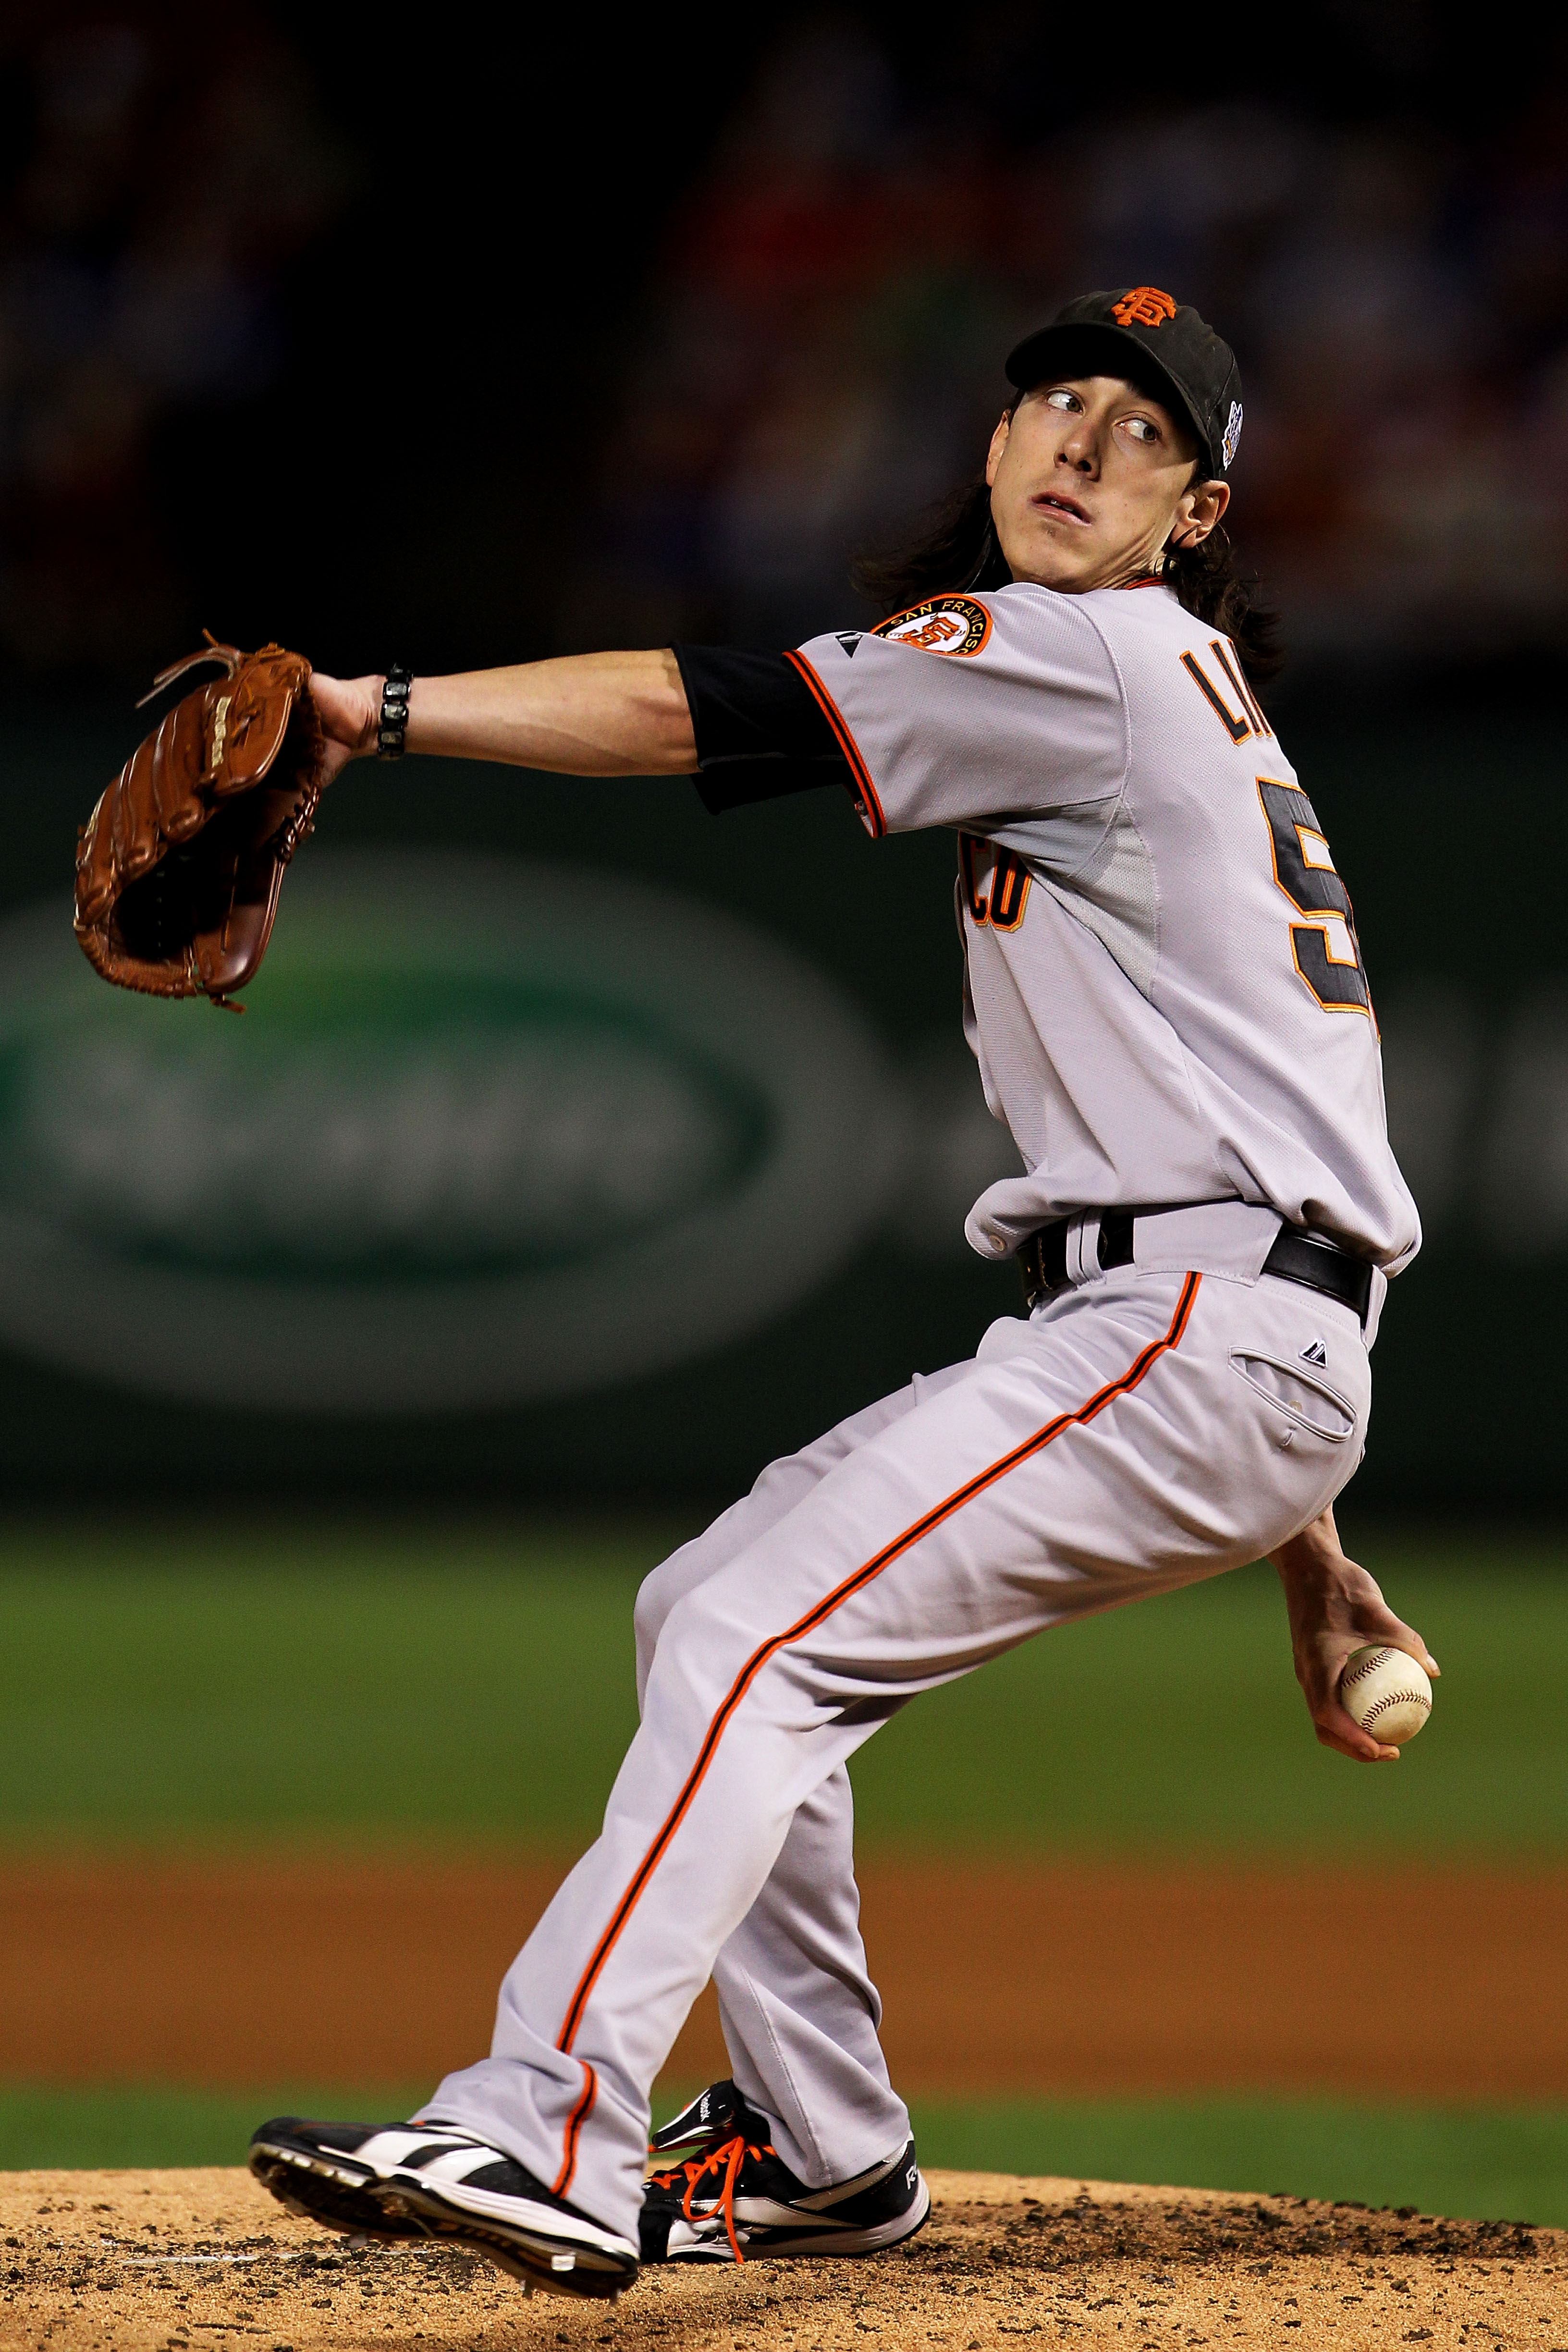 I miss watching Tim Lincecum in his prime. Big Time Timmy Jim was